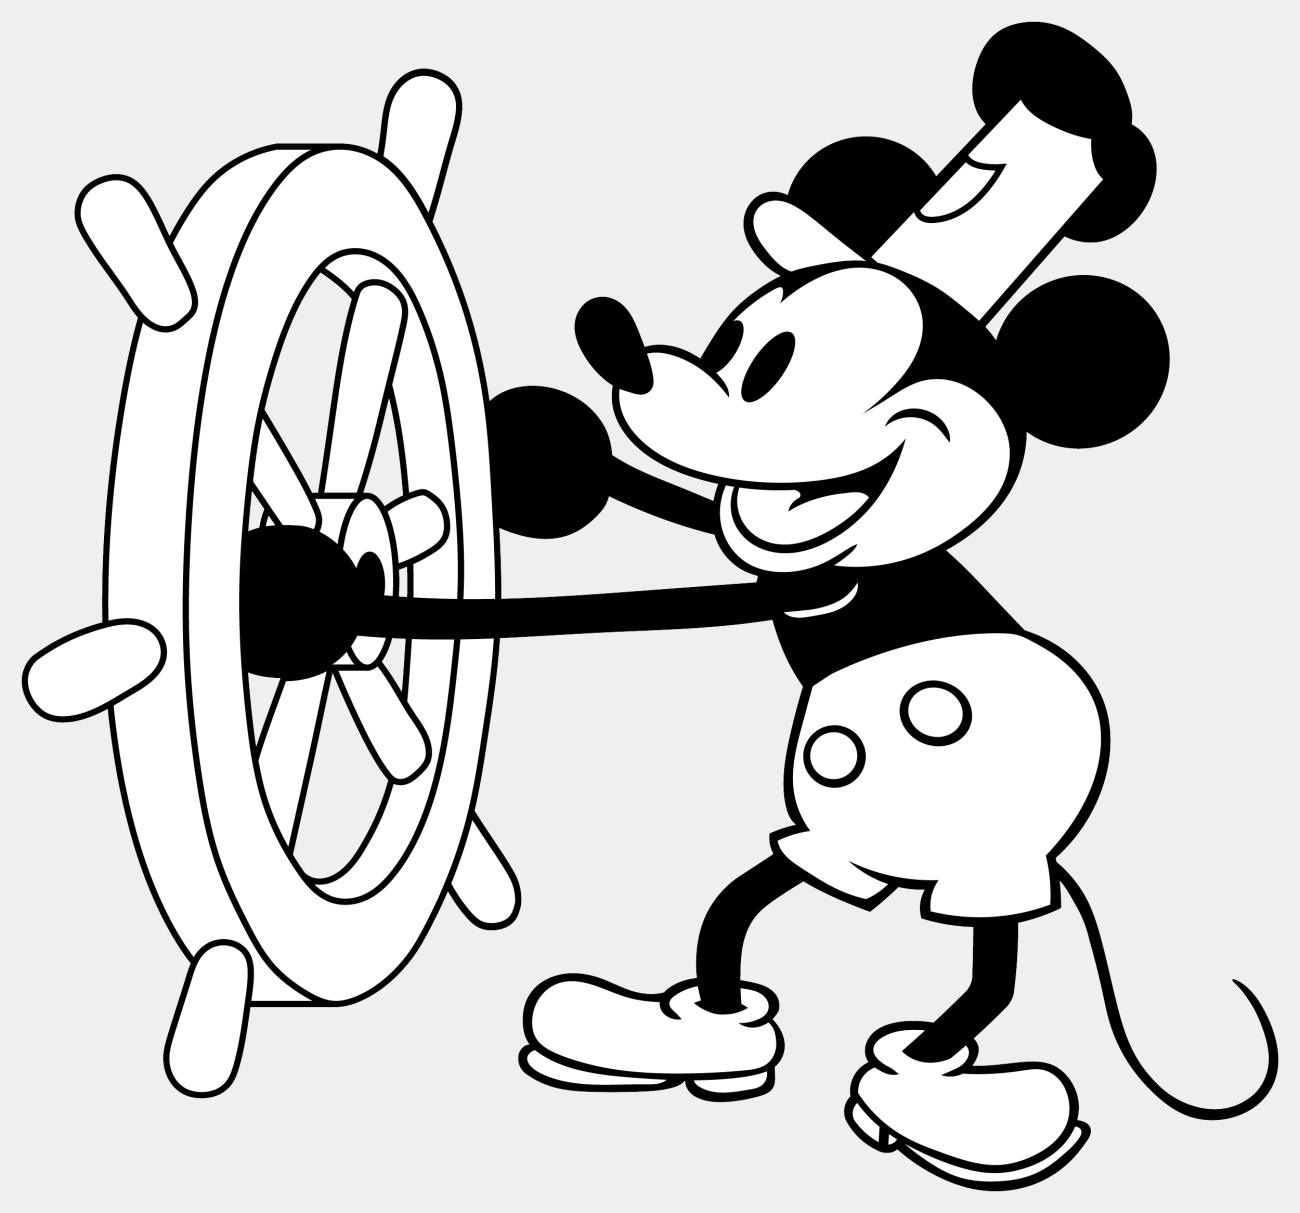 What Mickey Mouse's public domain debut means for copyright holders Hub